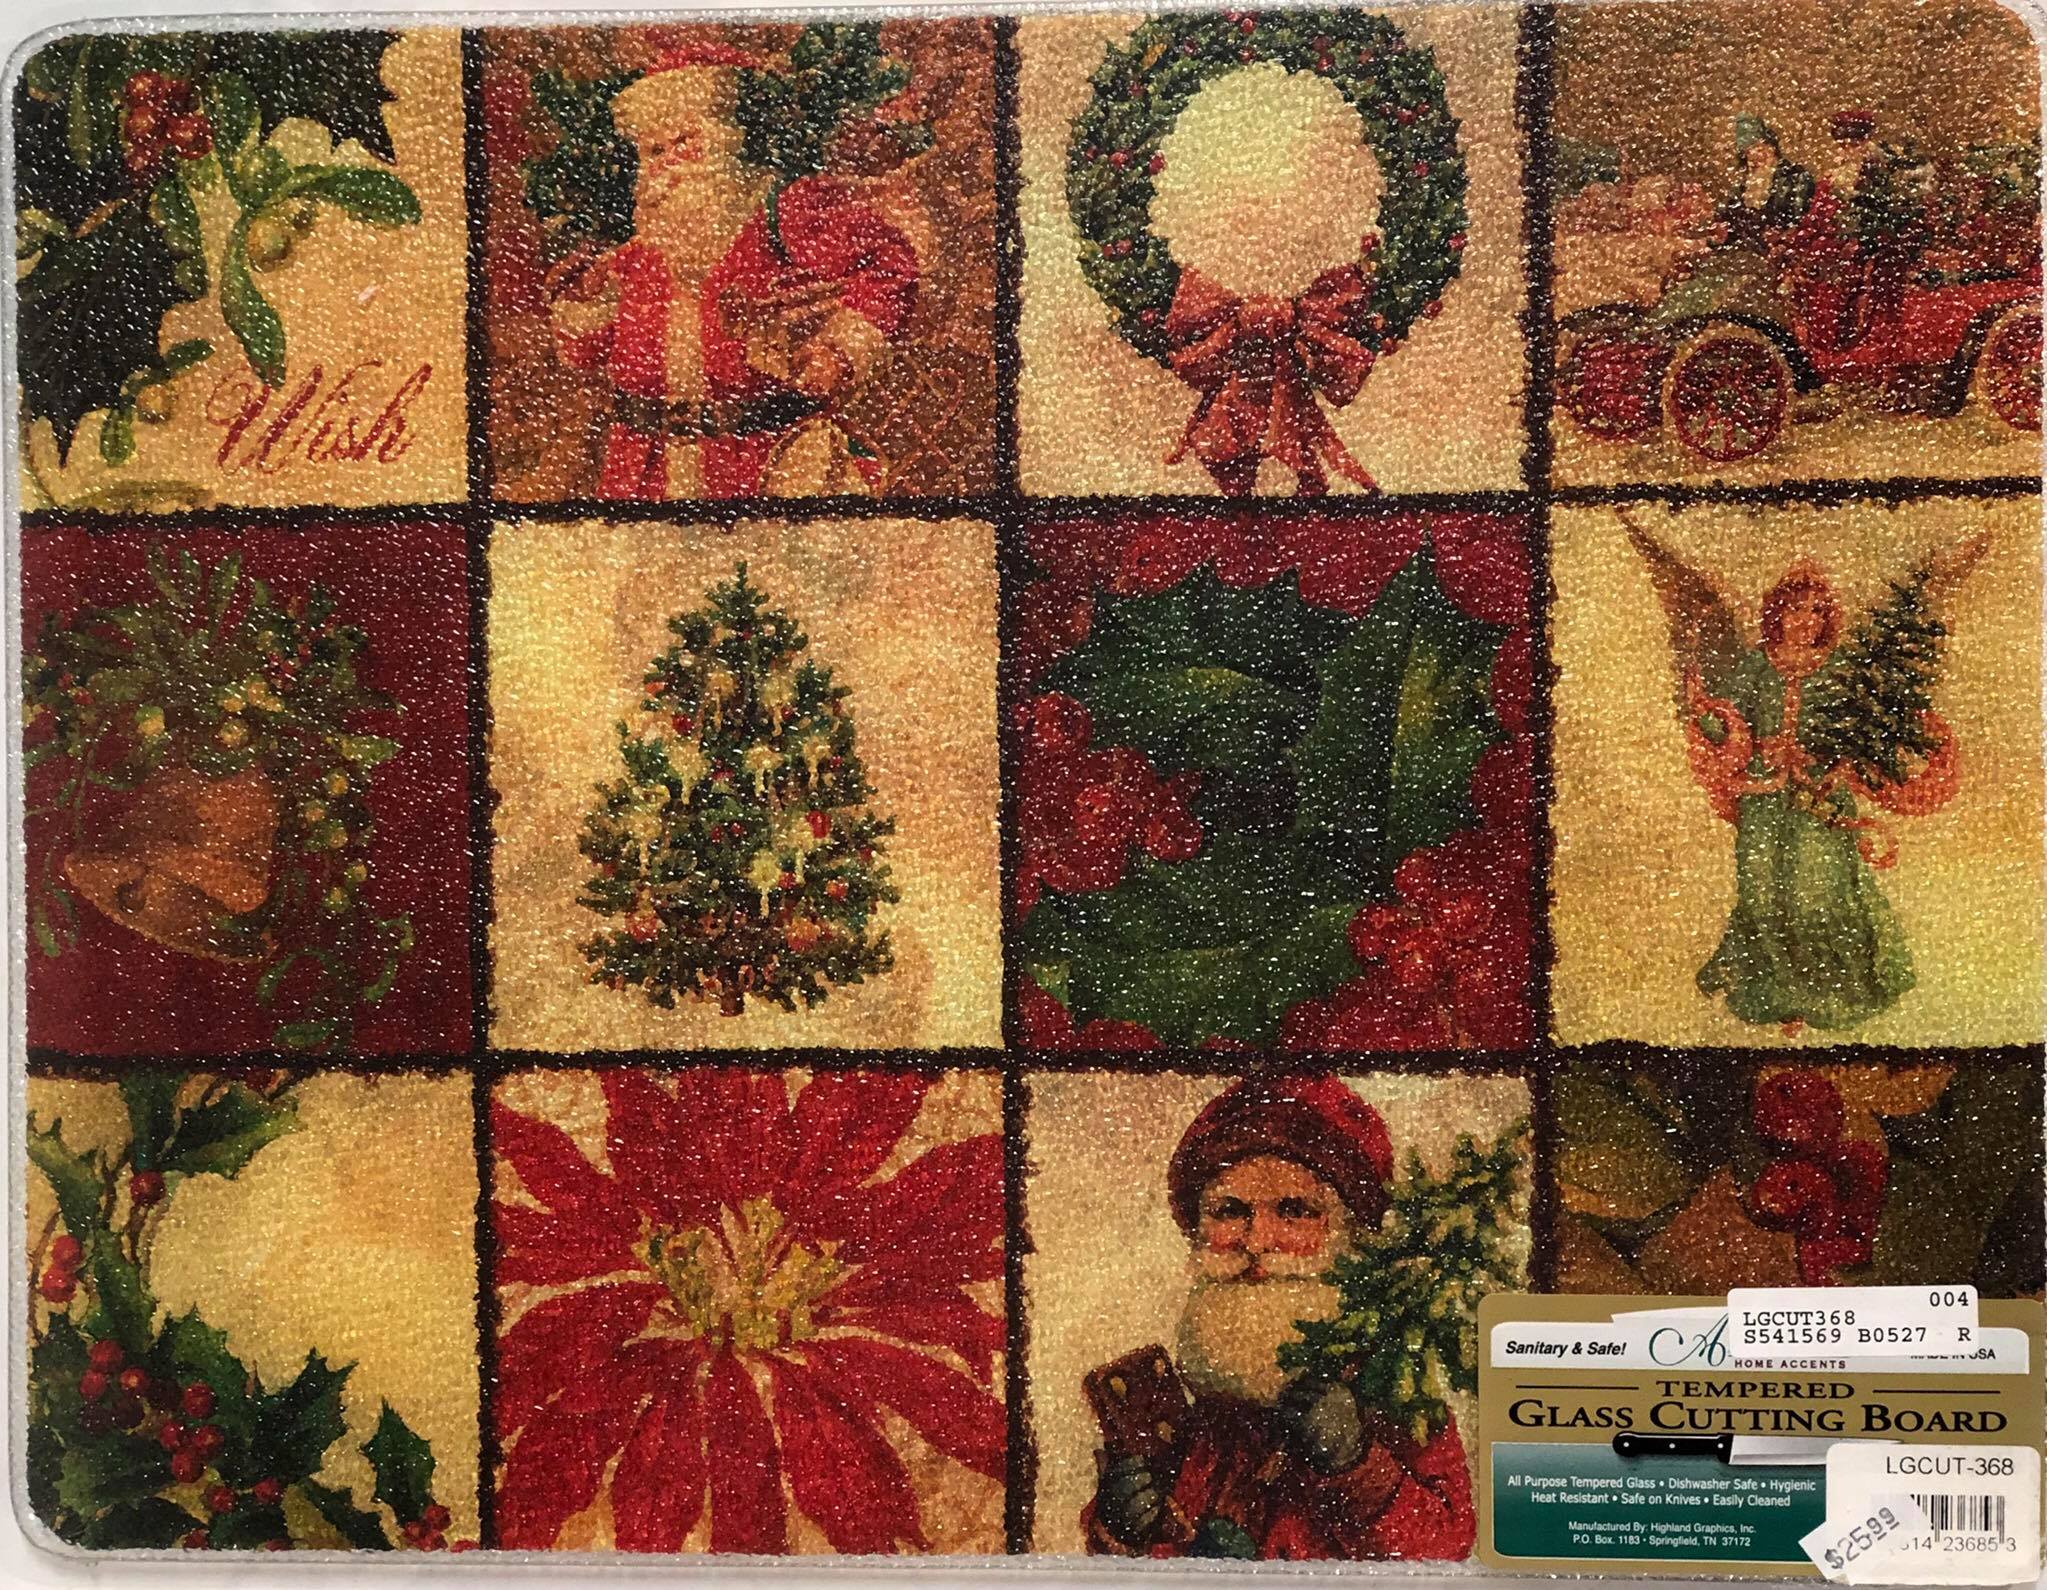 Tempered glass cutting board -Christmas squares